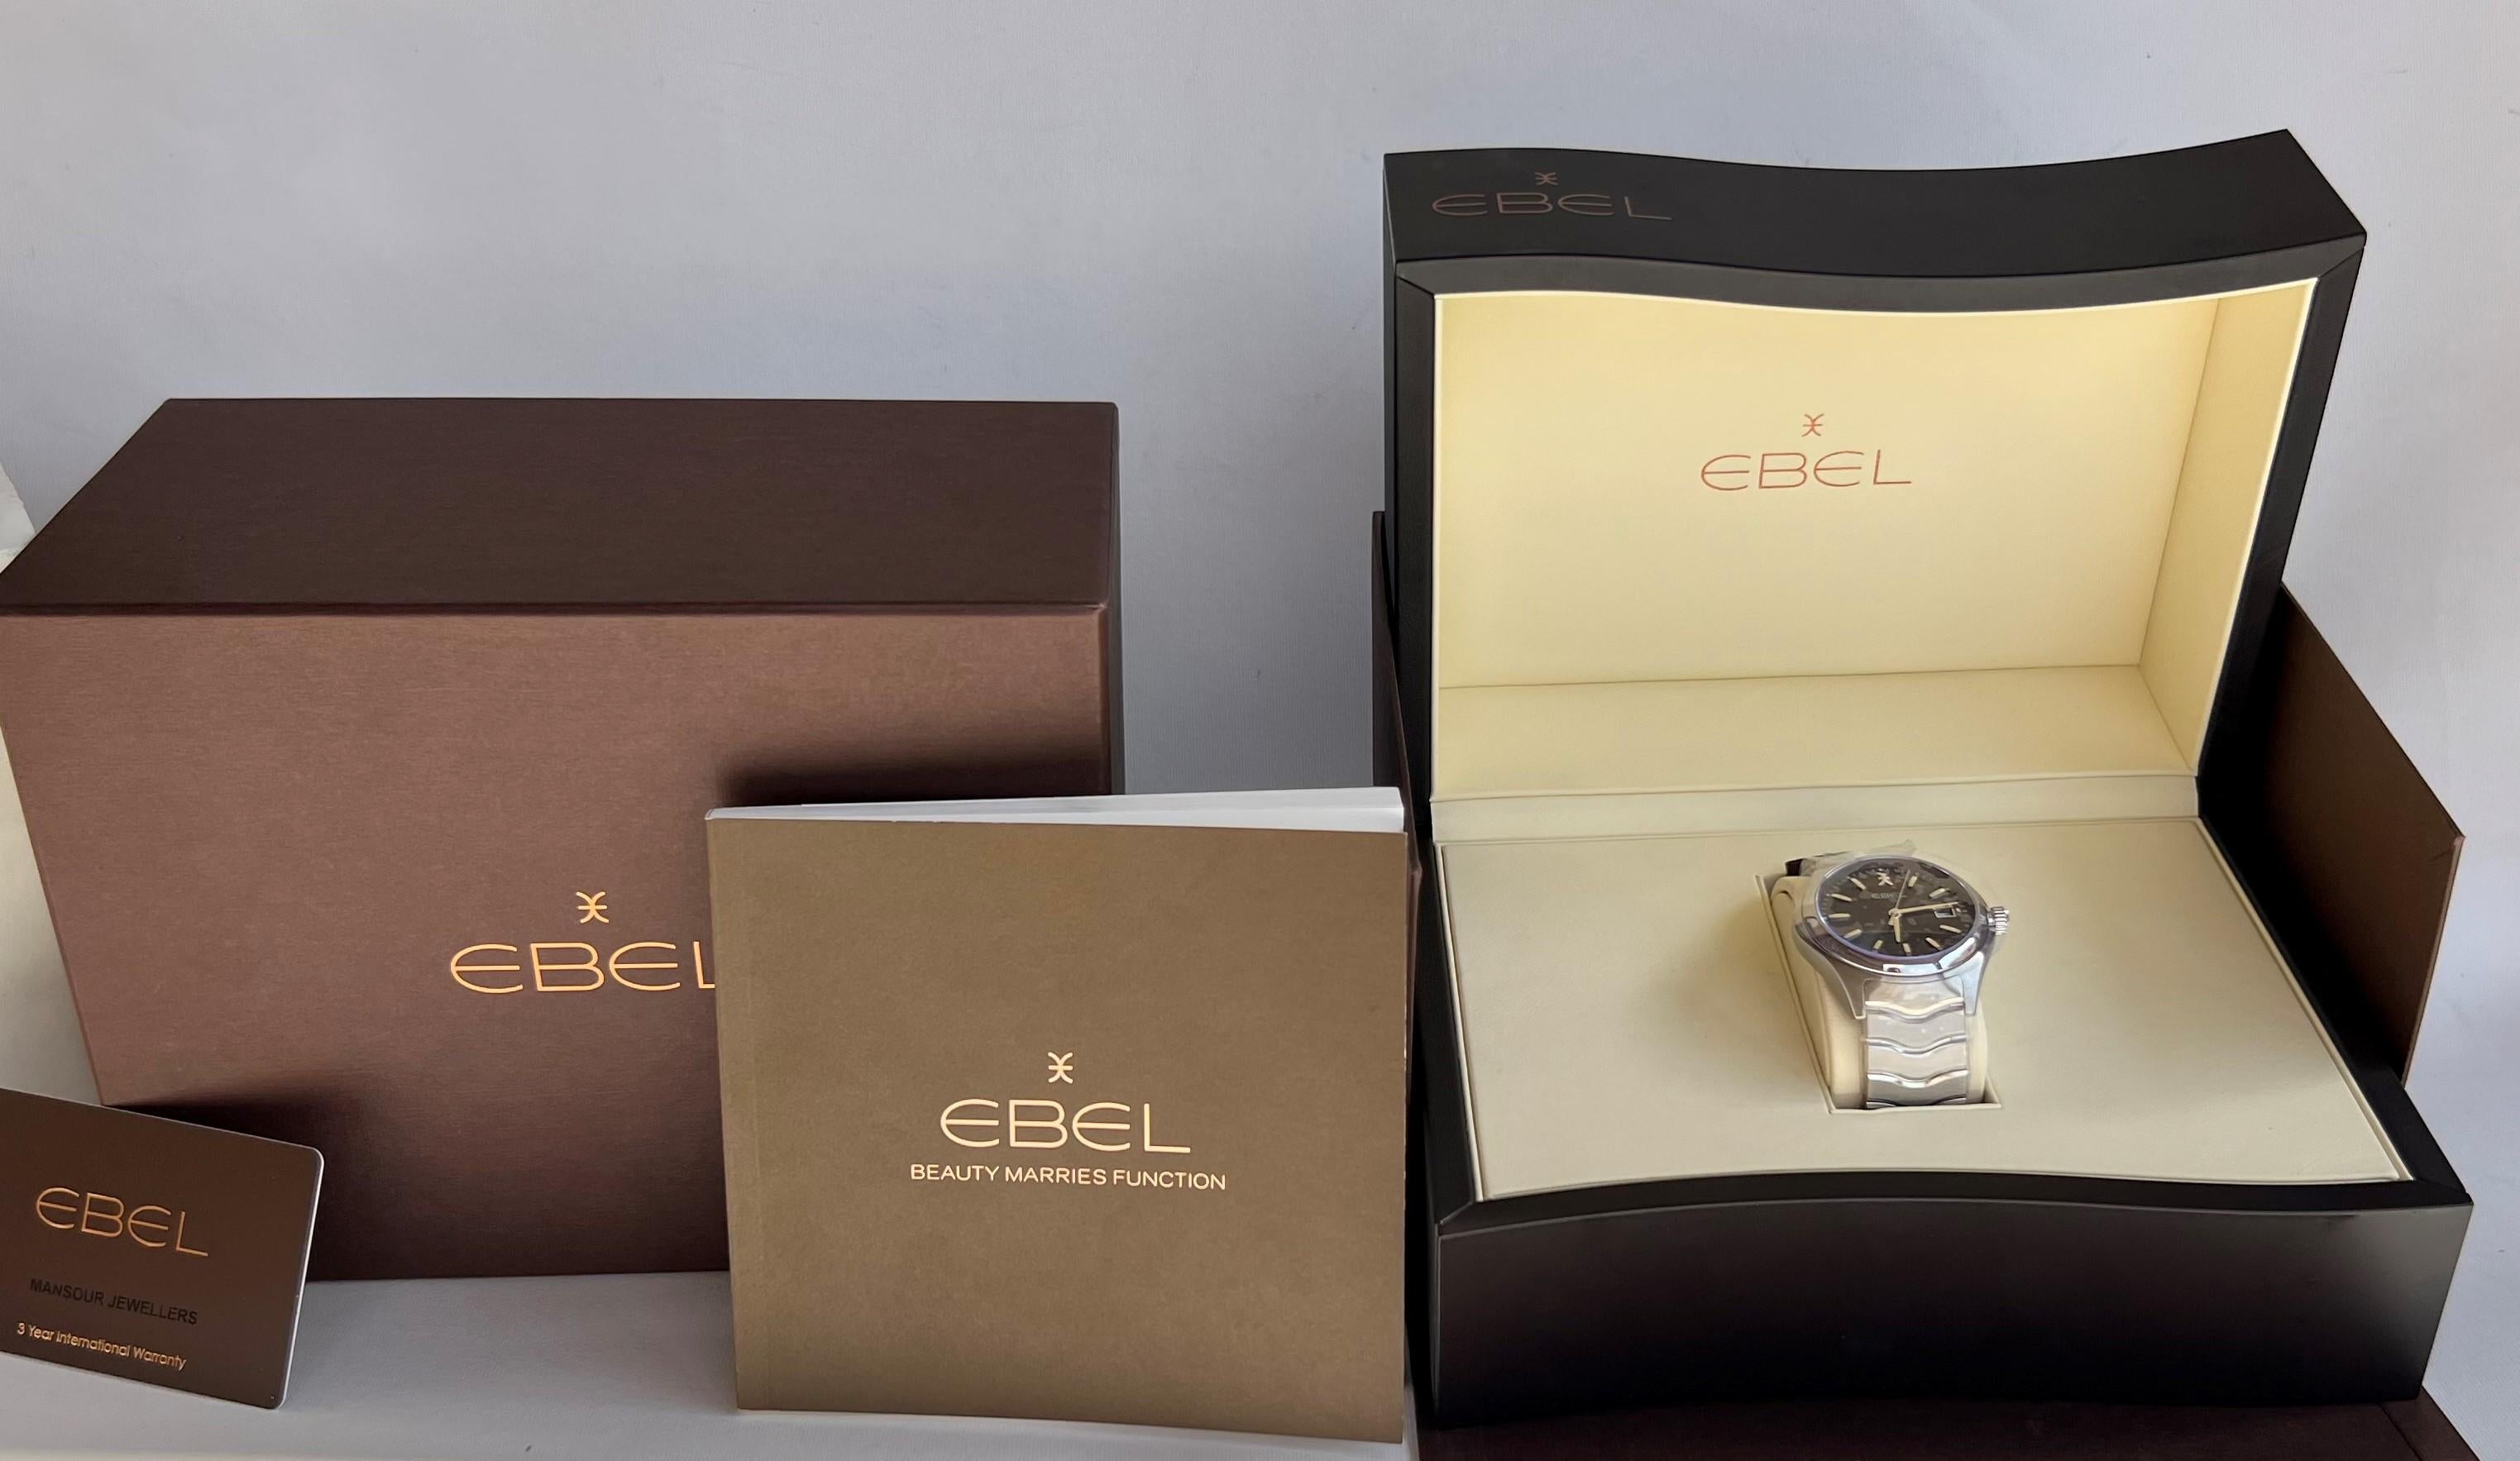 Brand : Ebel

Model: Classic Wave

Ref: 03.3.14.1037

Country Of Manufacture: Switzerland
Movement: Ebel Quartz

Case Material: Stainless Steel

Measurements :42mm diameter (excluding crown )

Band Type : Ebel Stainless Steel with Marked